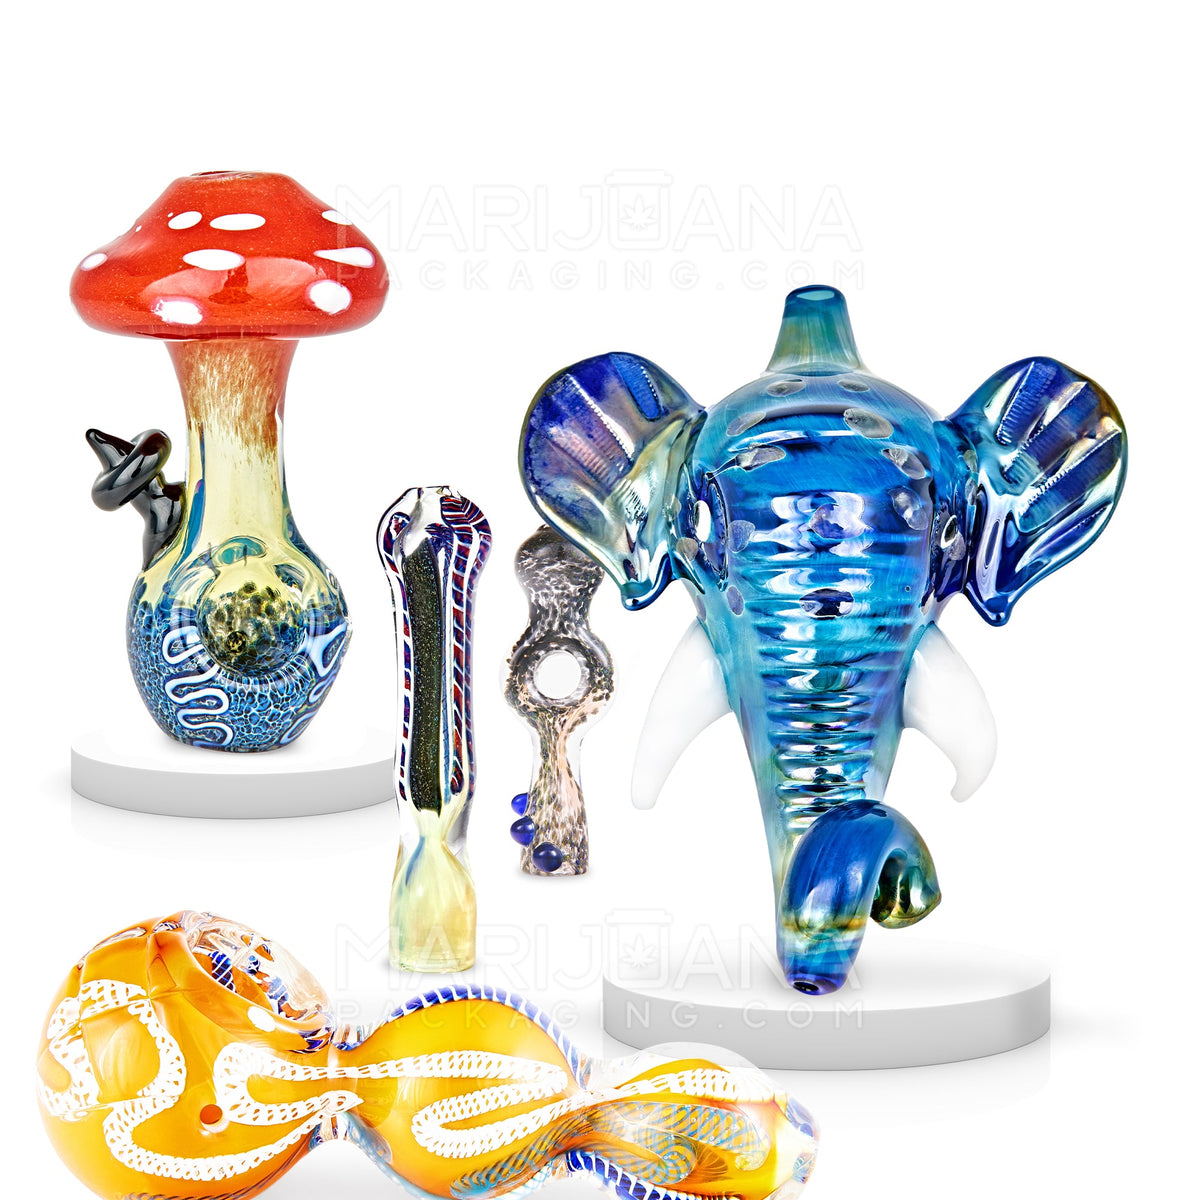 Swirled Fumed Turtle Glass Weed Pipe, Pipes For Sale